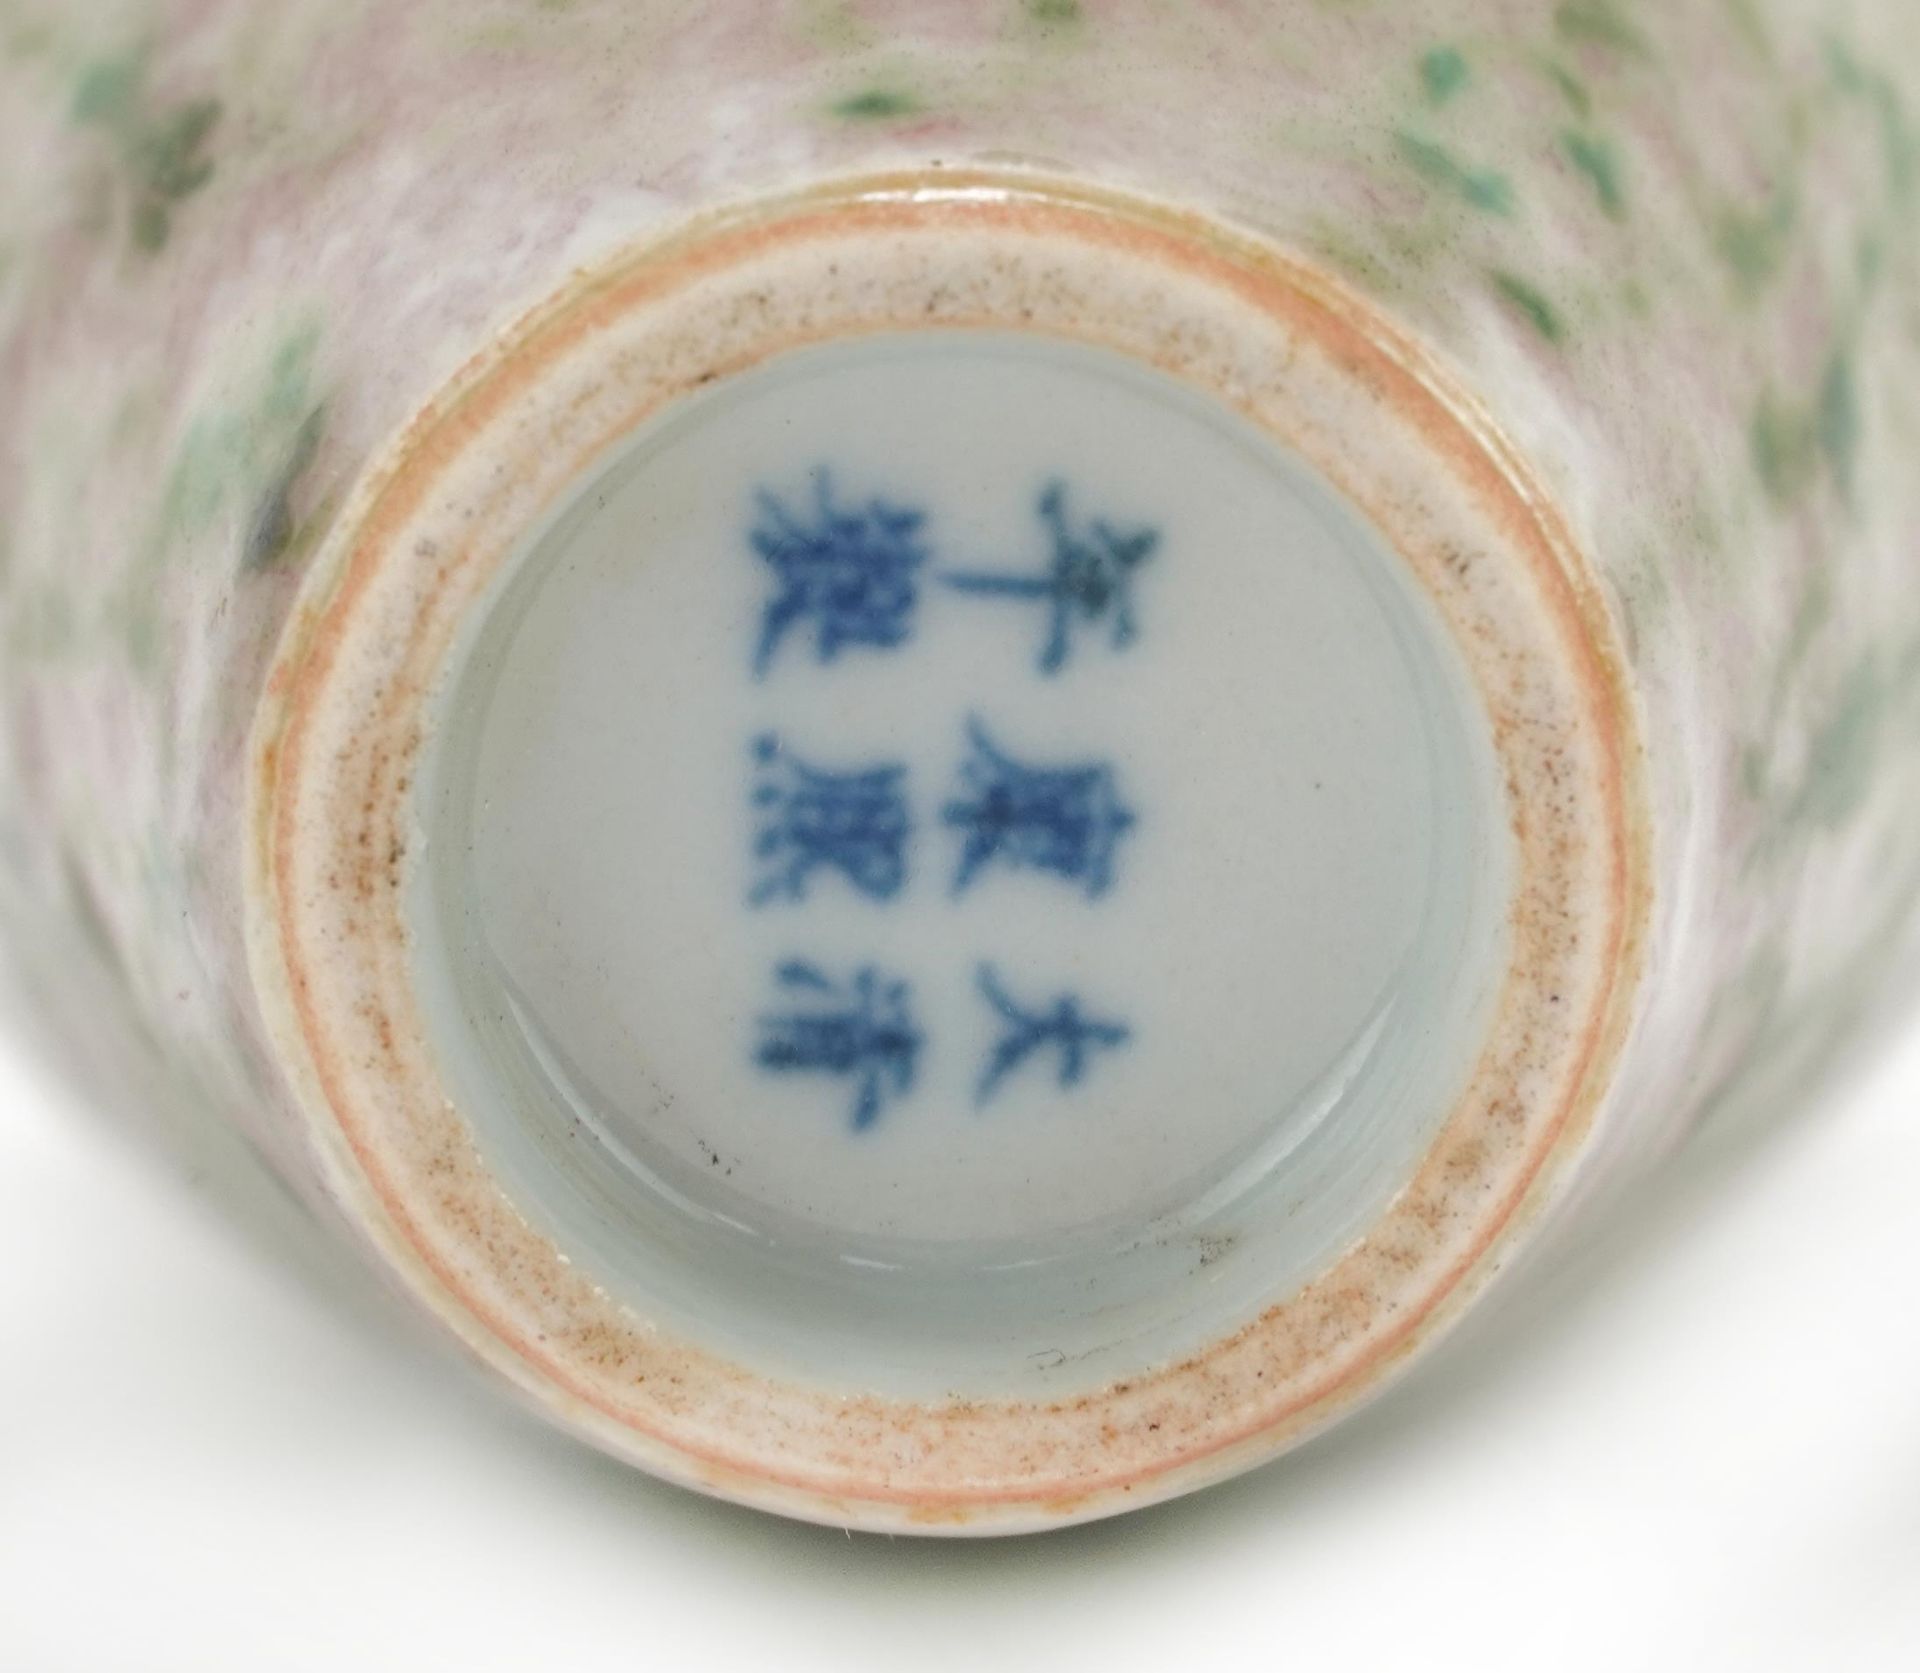 Chinese porcelain vase having a spotted green and red glaze, six figure character marks to the base - Image 8 of 8